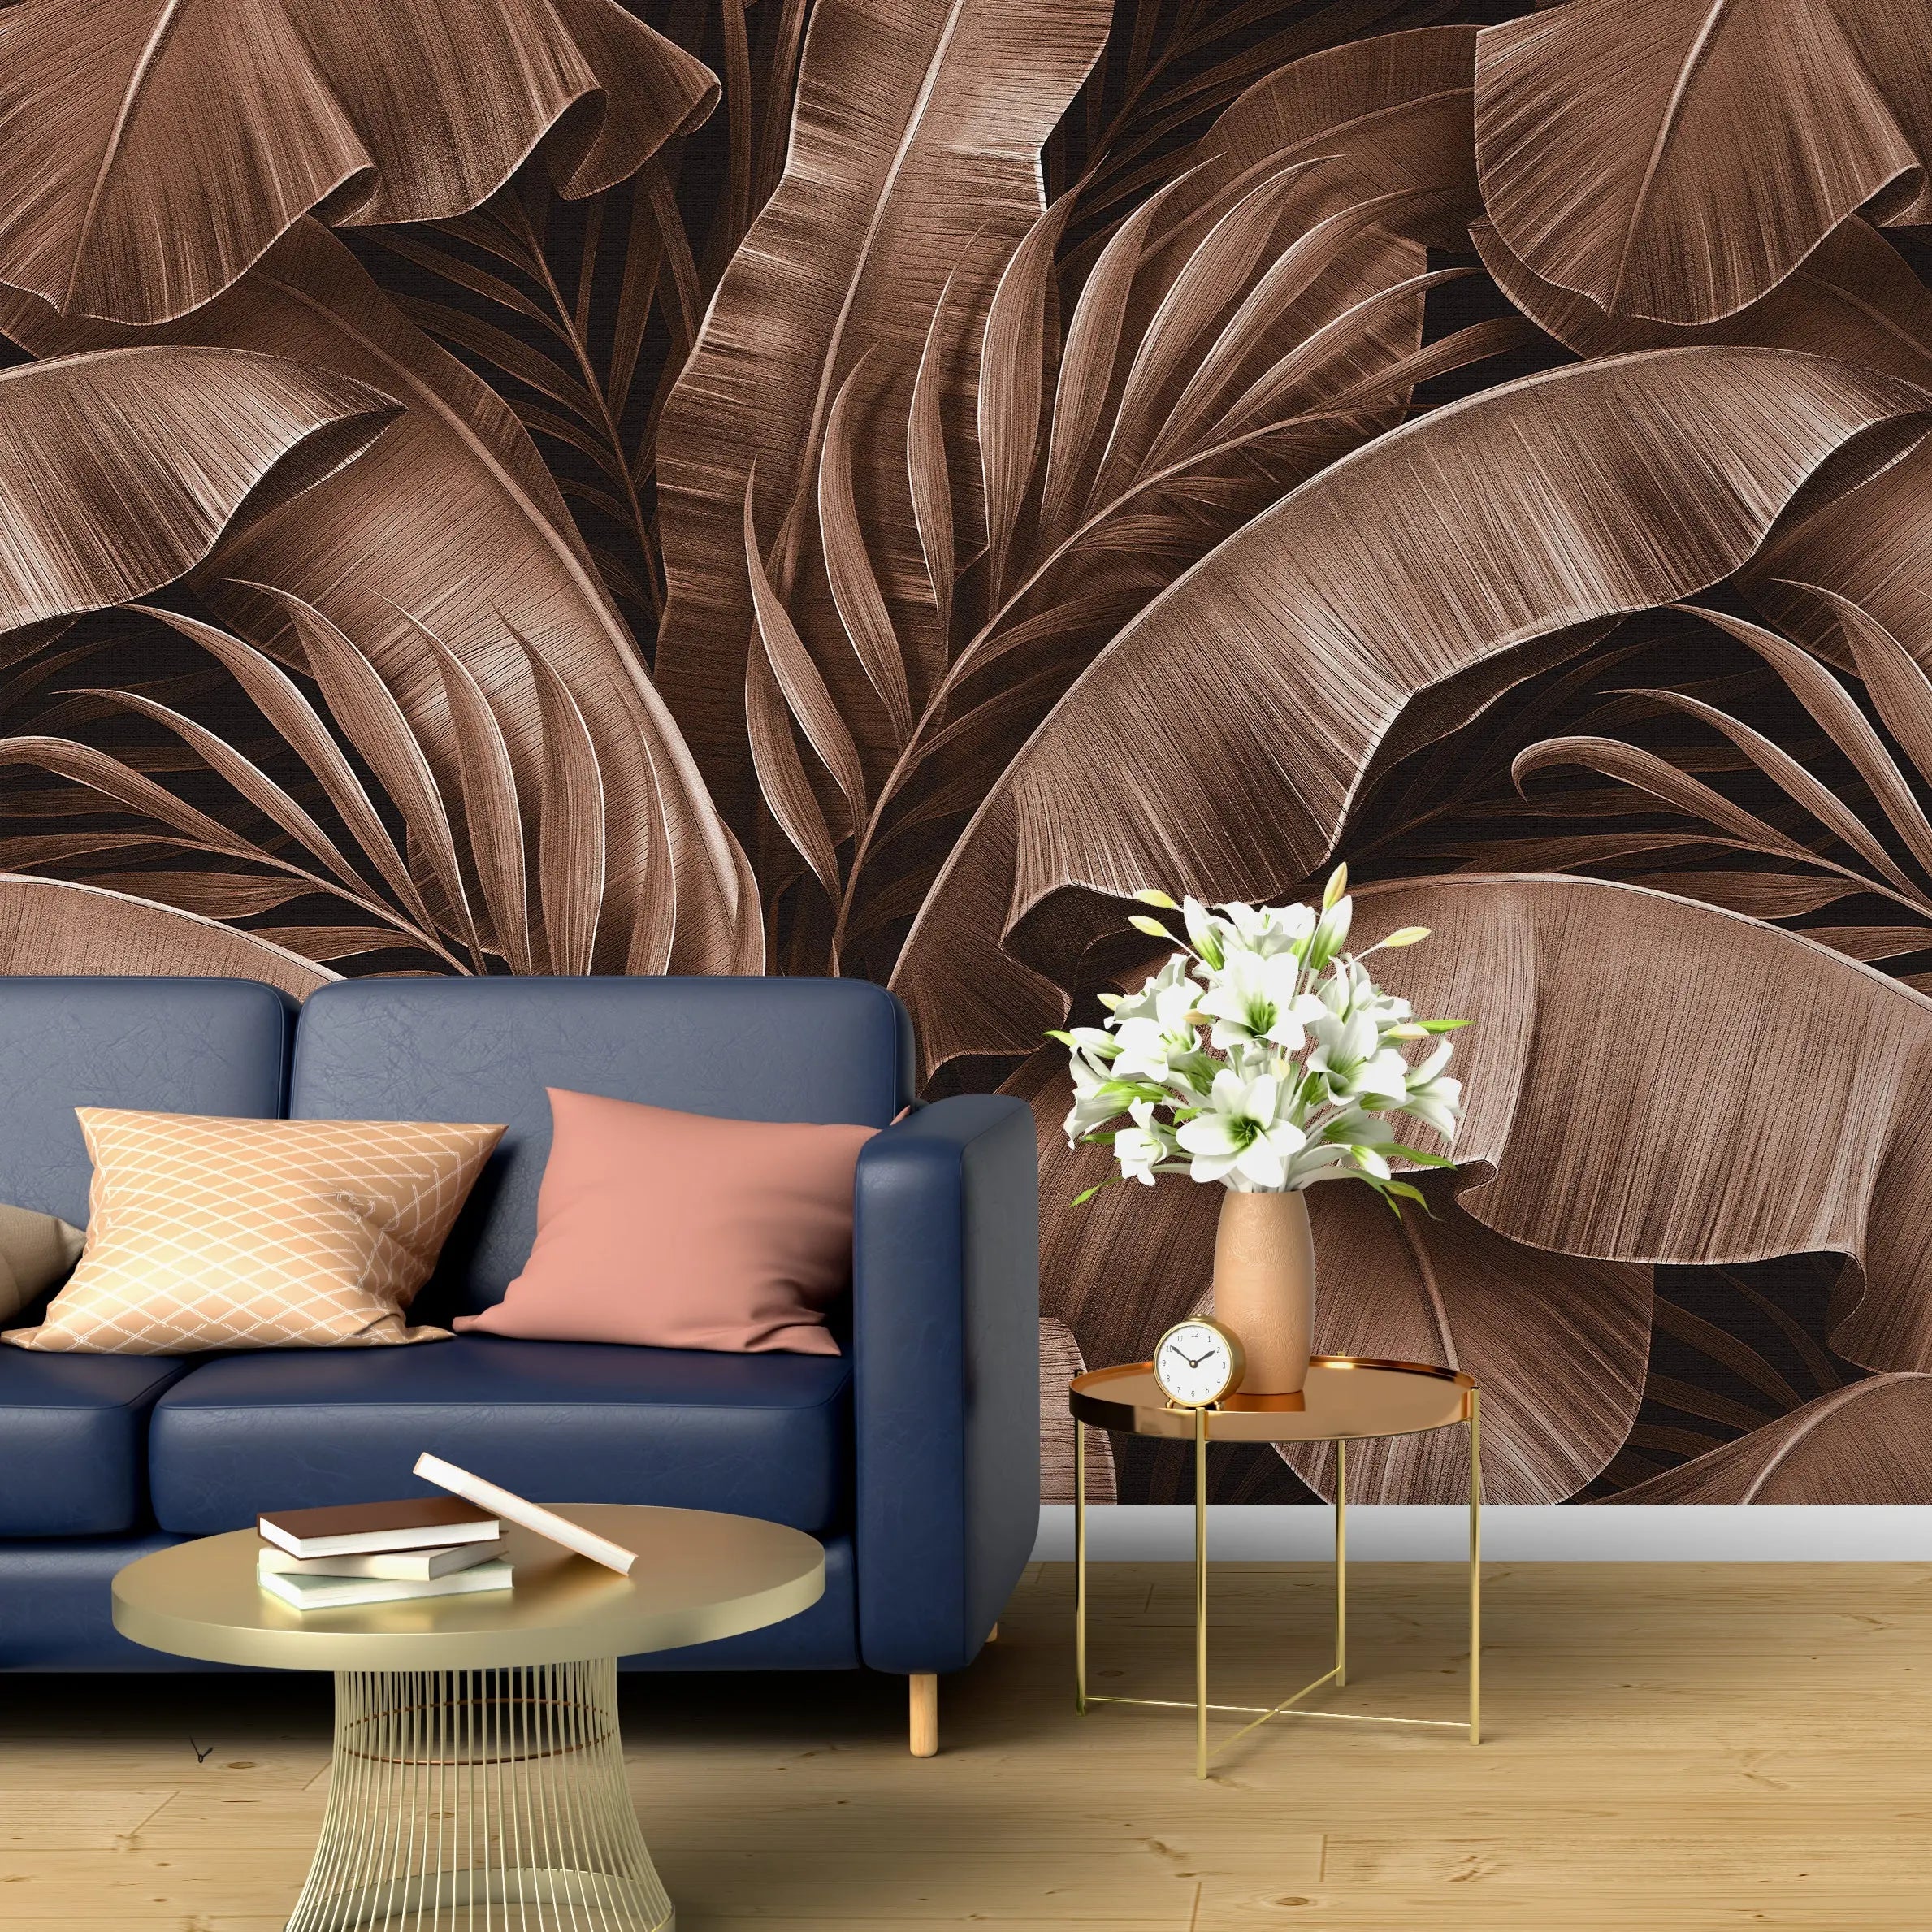 3075-D / Peel and Stick Boho Wallpaper: Tropical Palm Leave Design, Perfect for Accent Wall Decor - Artevella